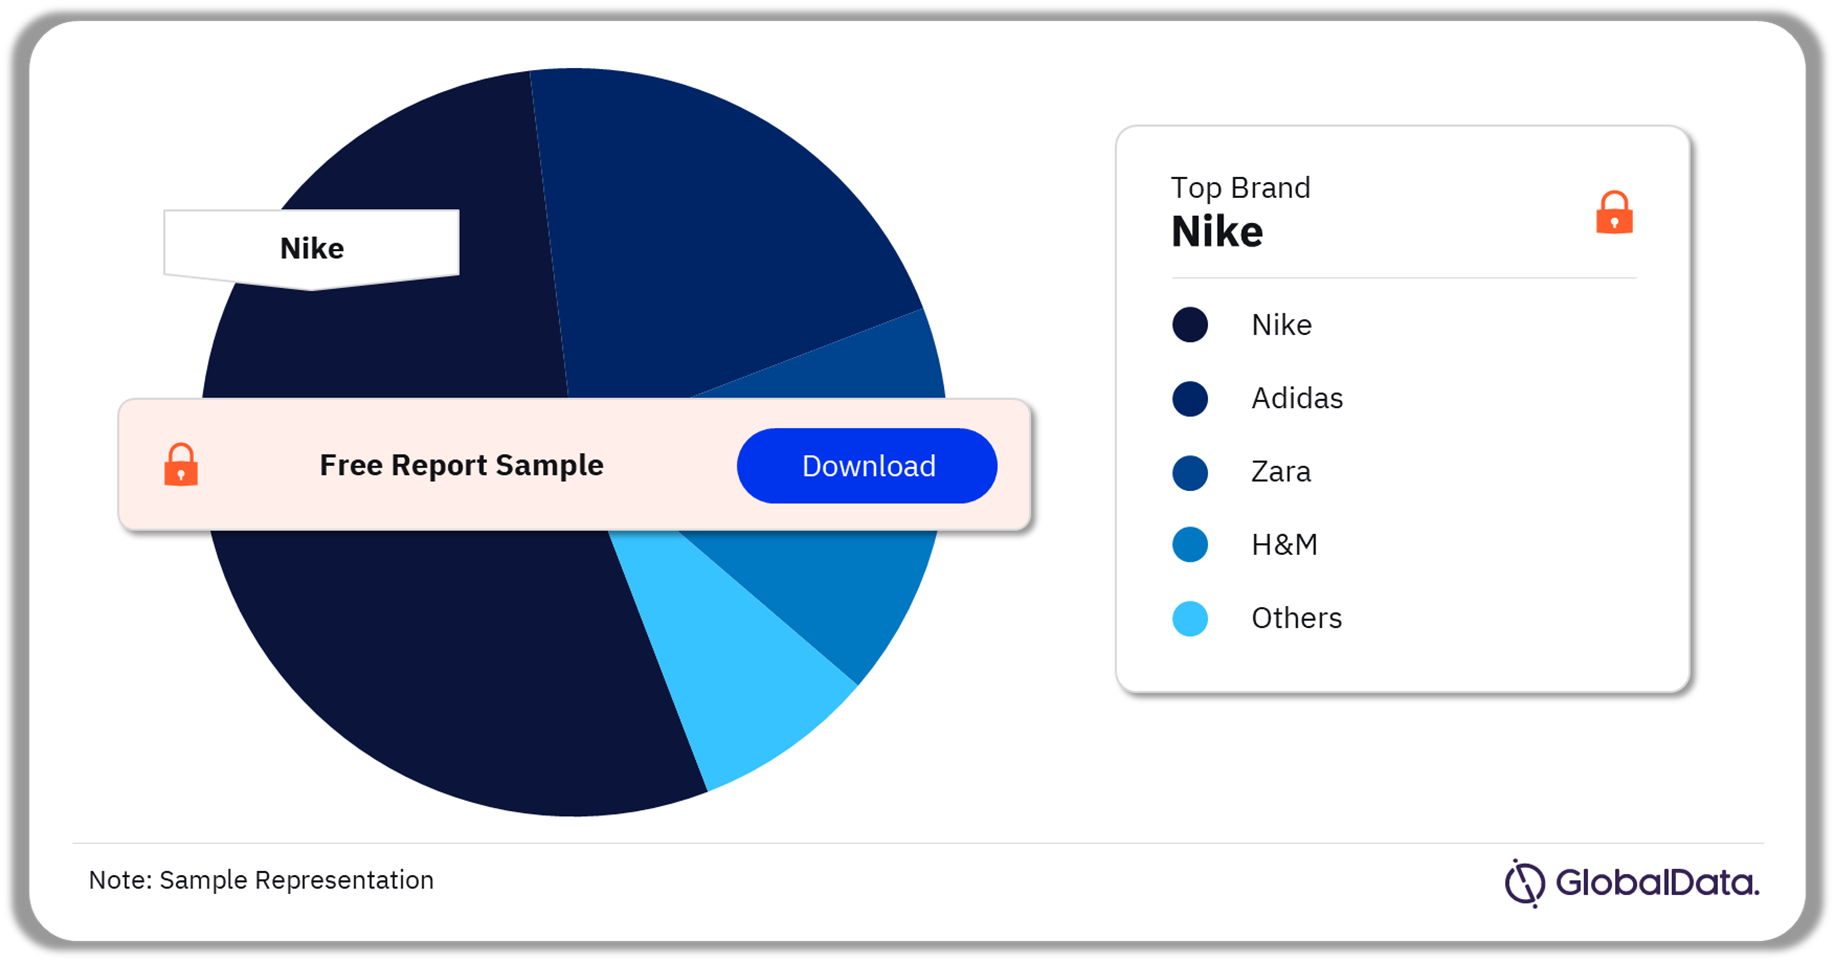 Apparel Market - Size, Trends, Industry Analysis & Overview